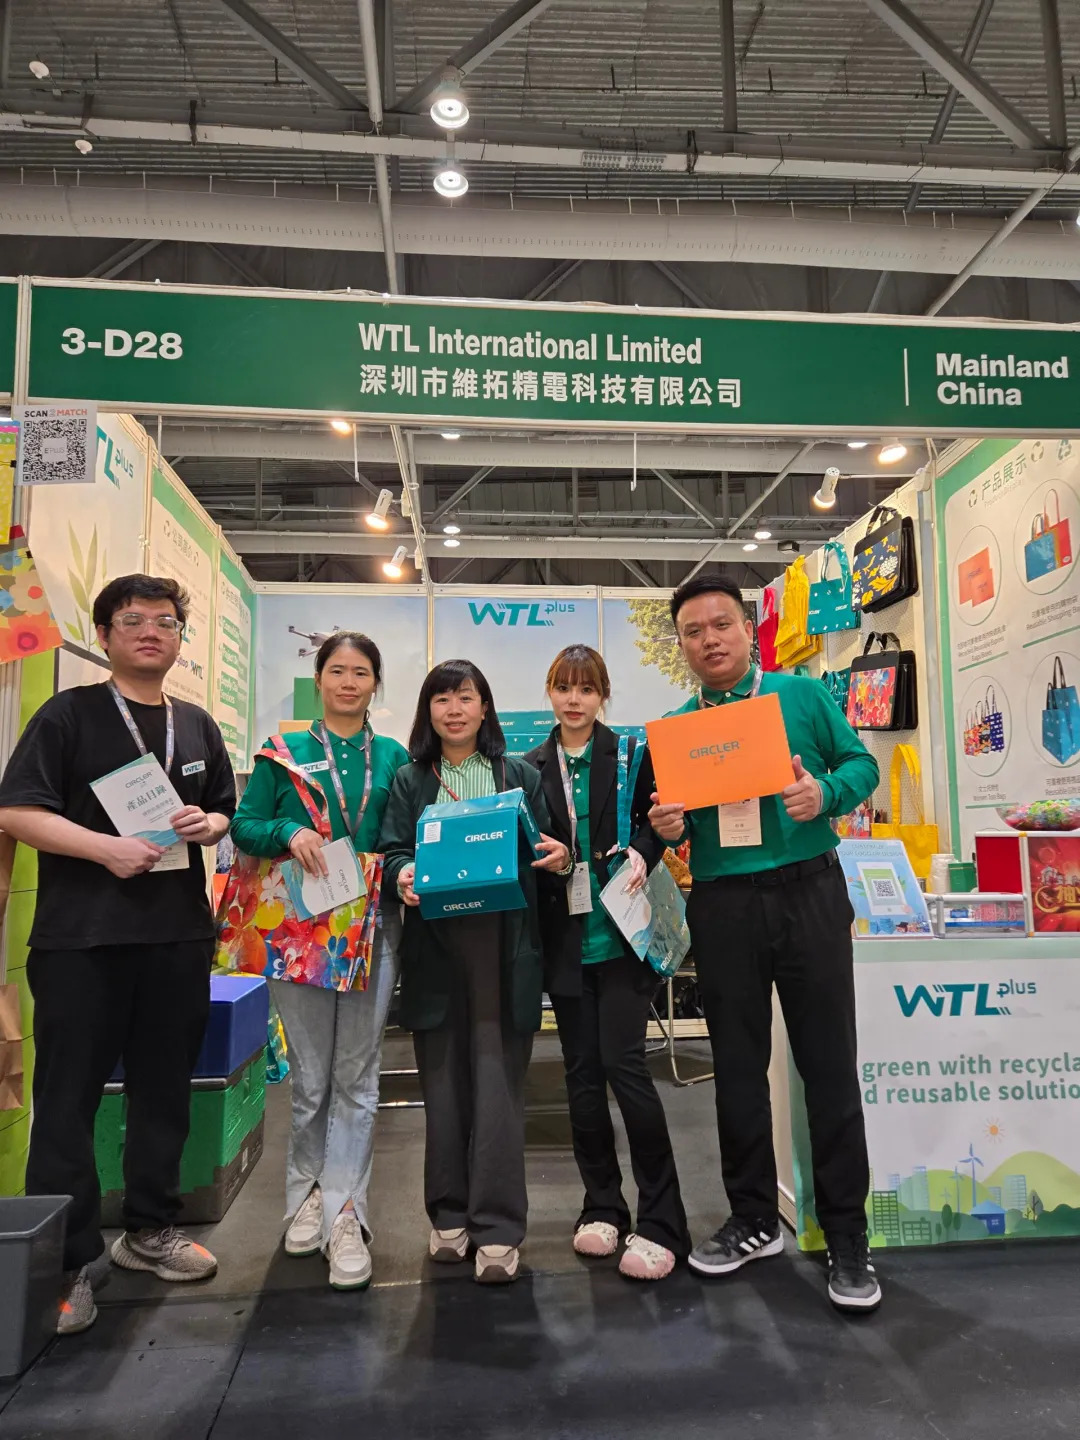 Exhibition Information | Welcome to the Hong Kong International Printing and Packaging Exhibition.